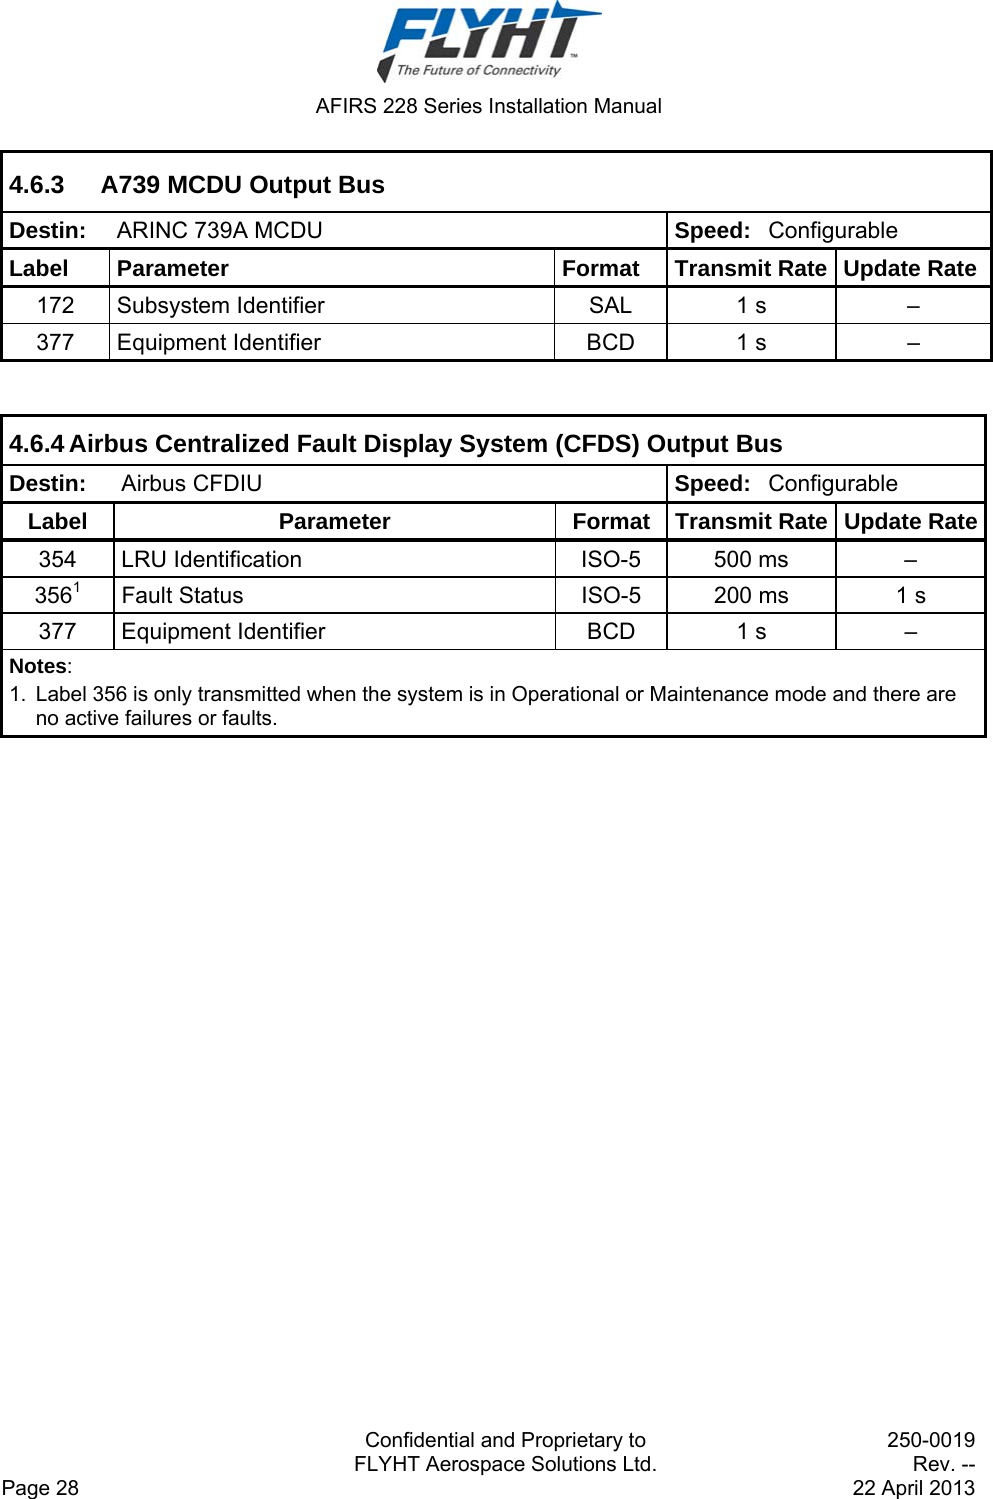  AFIRS 228 Series Installation Manual   Confidential and Proprietary to  250-0019   FLYHT Aerospace Solutions Ltd.  Rev. -- Page 28    22 April 2013 4.6.3  A739 MCDU Output Bus Destin:  ARINC 739A MCDU  Speed: Configurable Label  Parameter  Format  Transmit Rate  Update Rate 172  Subsystem Identifier  SAL  1 s  – 377  Equipment Identifier  BCD  1 s  –  4.6.4 Airbus Centralized Fault Display System (CFDS) Output Bus Destin:  Airbus CFDIU  Speed: Configurable Label  Parameter  Format  Transmit Rate  Update Rate354  LRU Identification  ISO-5  500 ms  – 3561  Fault Status  ISO-5  200 ms  1 s 377  Equipment Identifier  BCD  1 s  – Notes: 1.  Label 356 is only transmitted when the system is in Operational or Maintenance mode and there are no active failures or faults.  